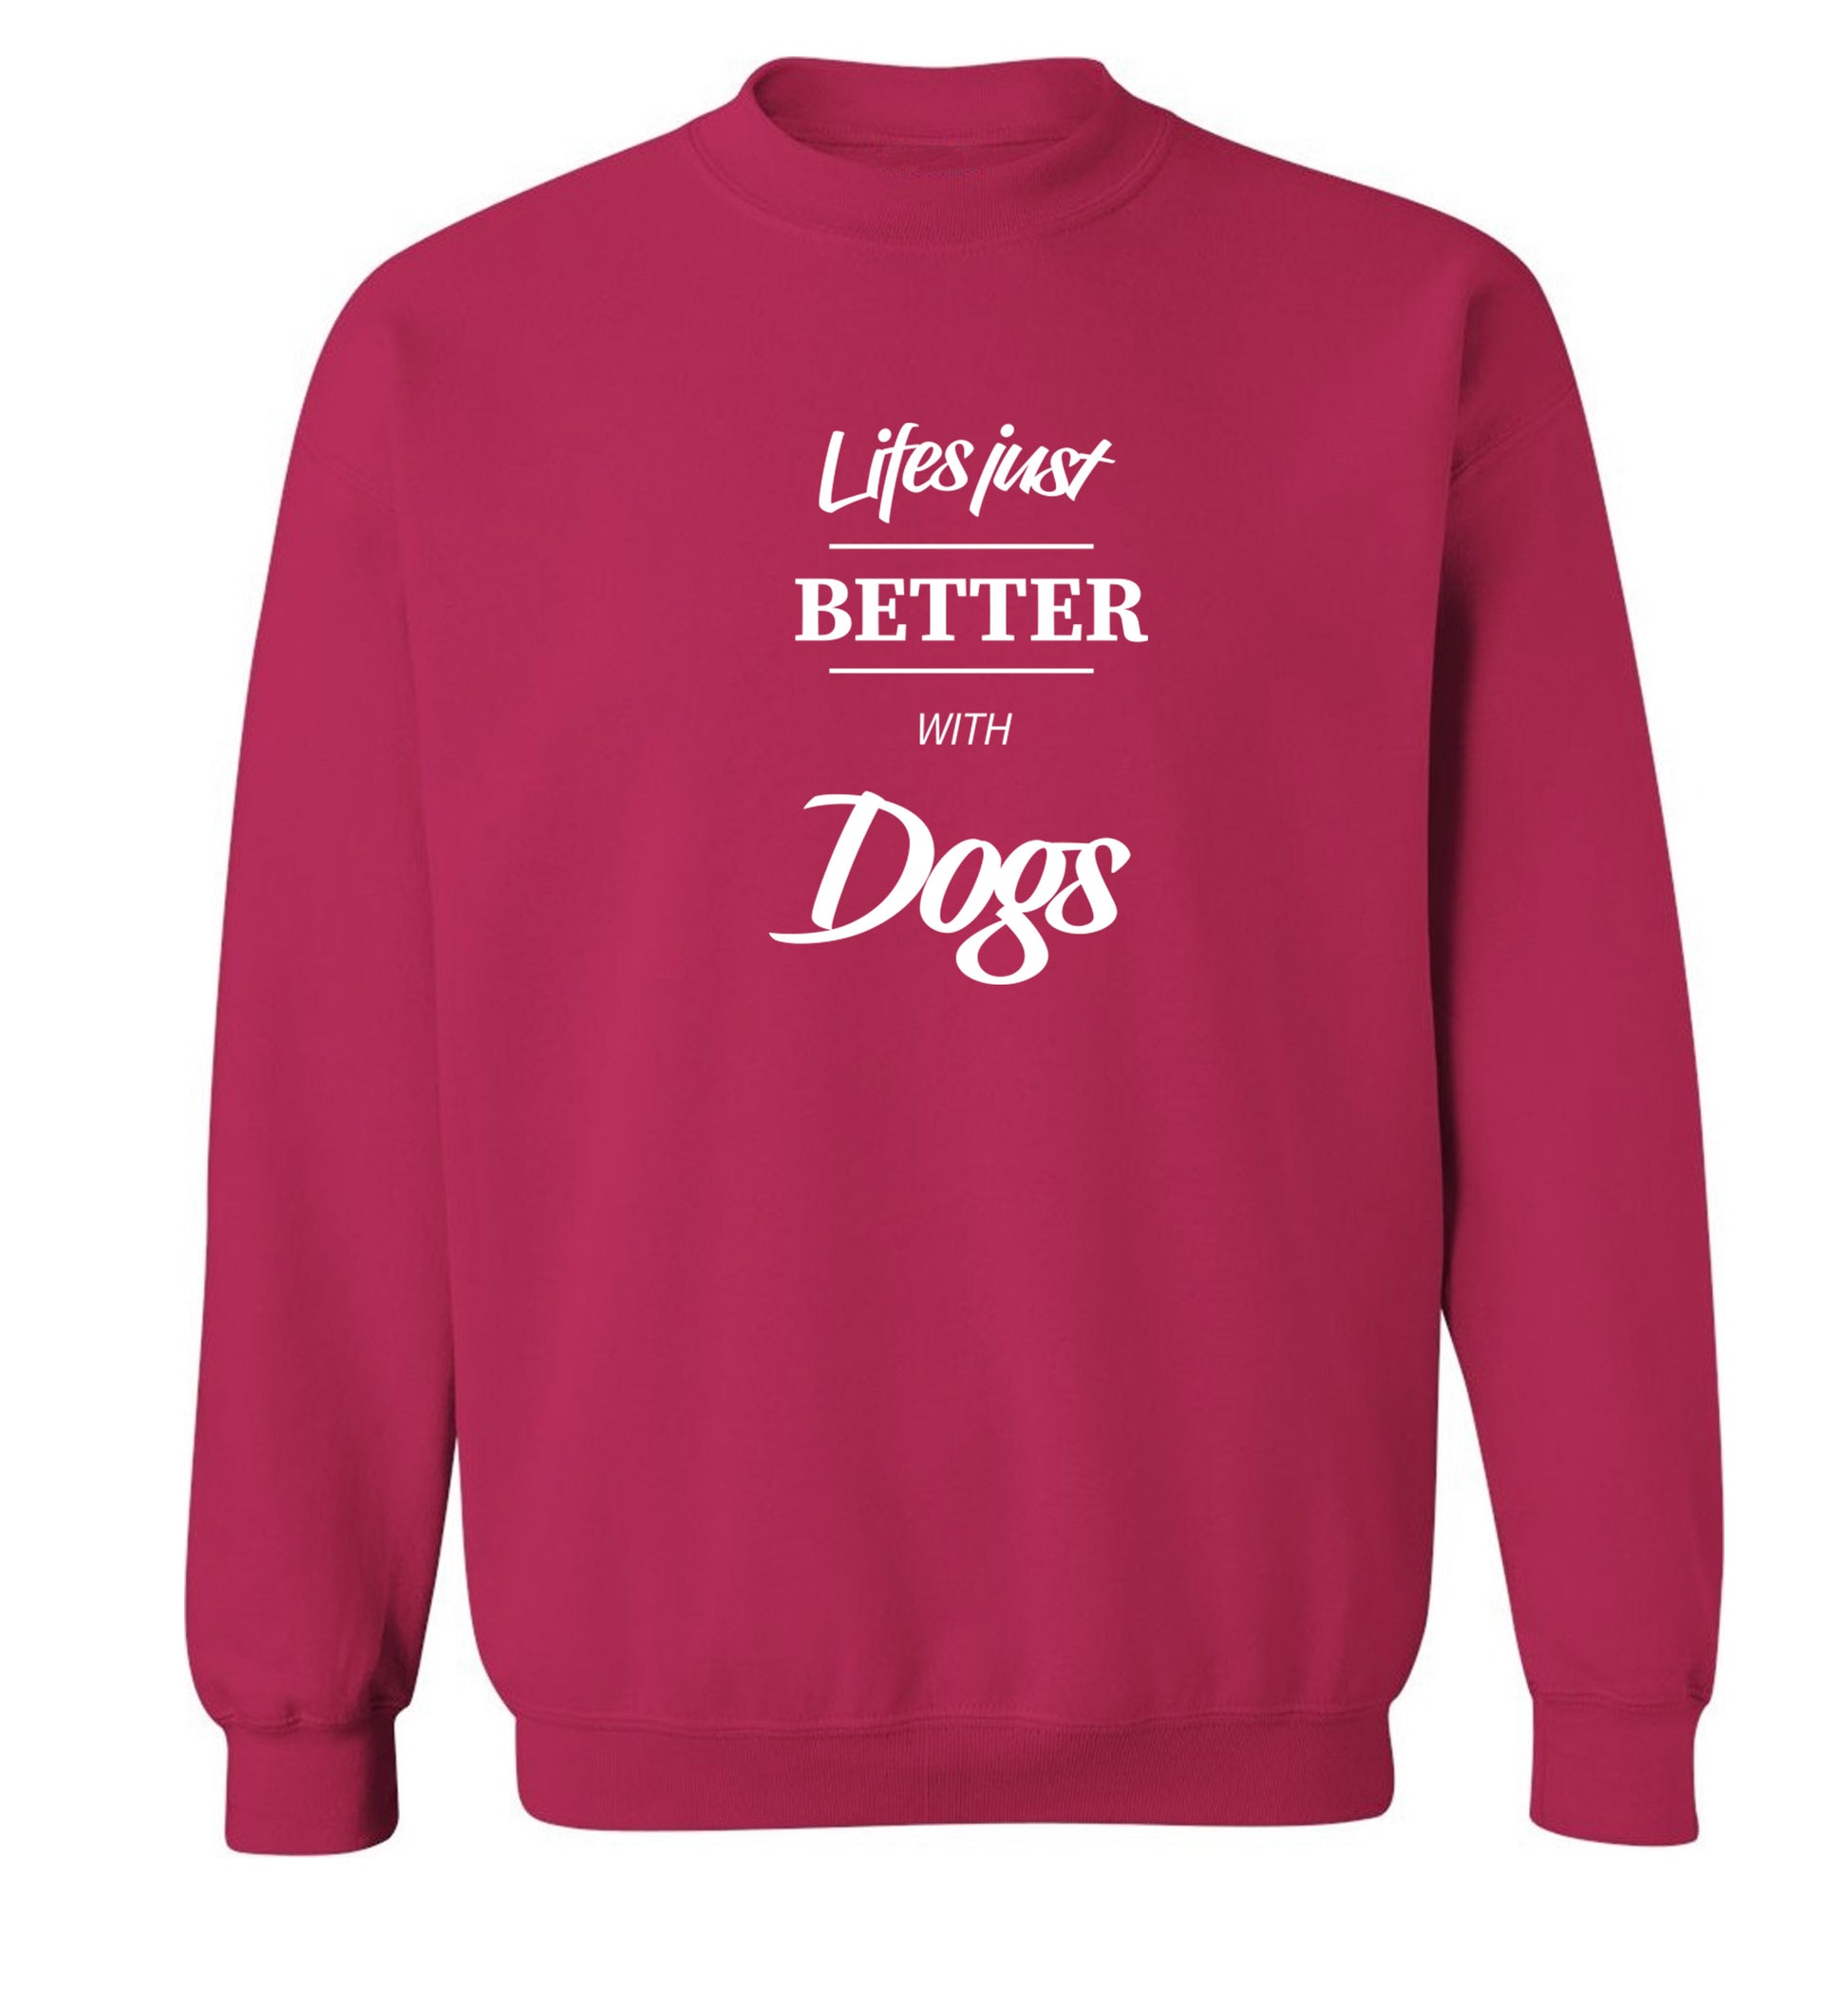 life is better with dogs Adult's unisex pink Sweater 2XL